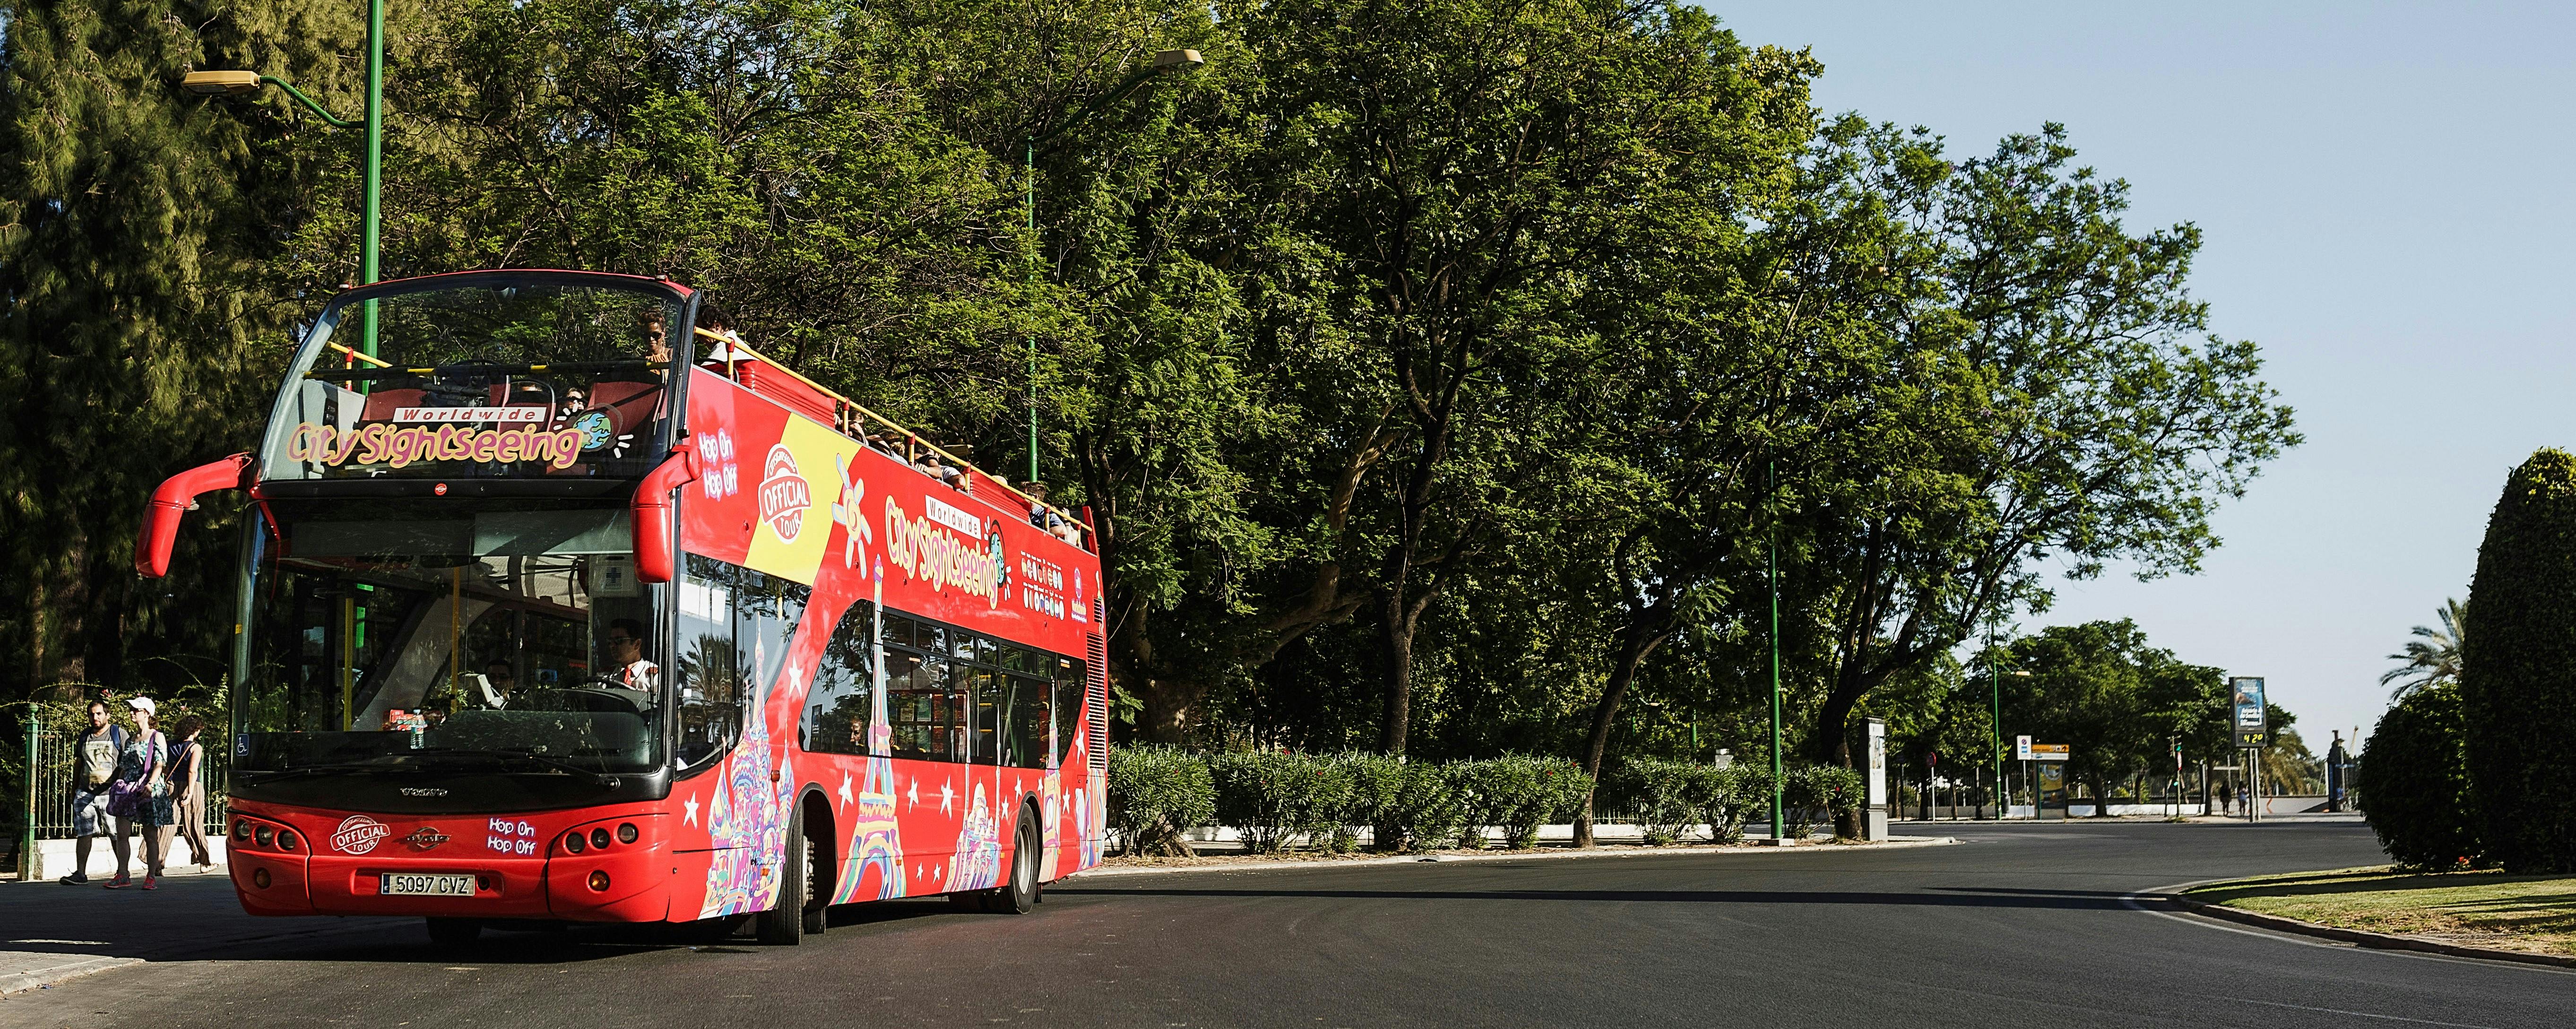 City Sightseeing Hop-On Hop-Off-Bustour in Benalmádena